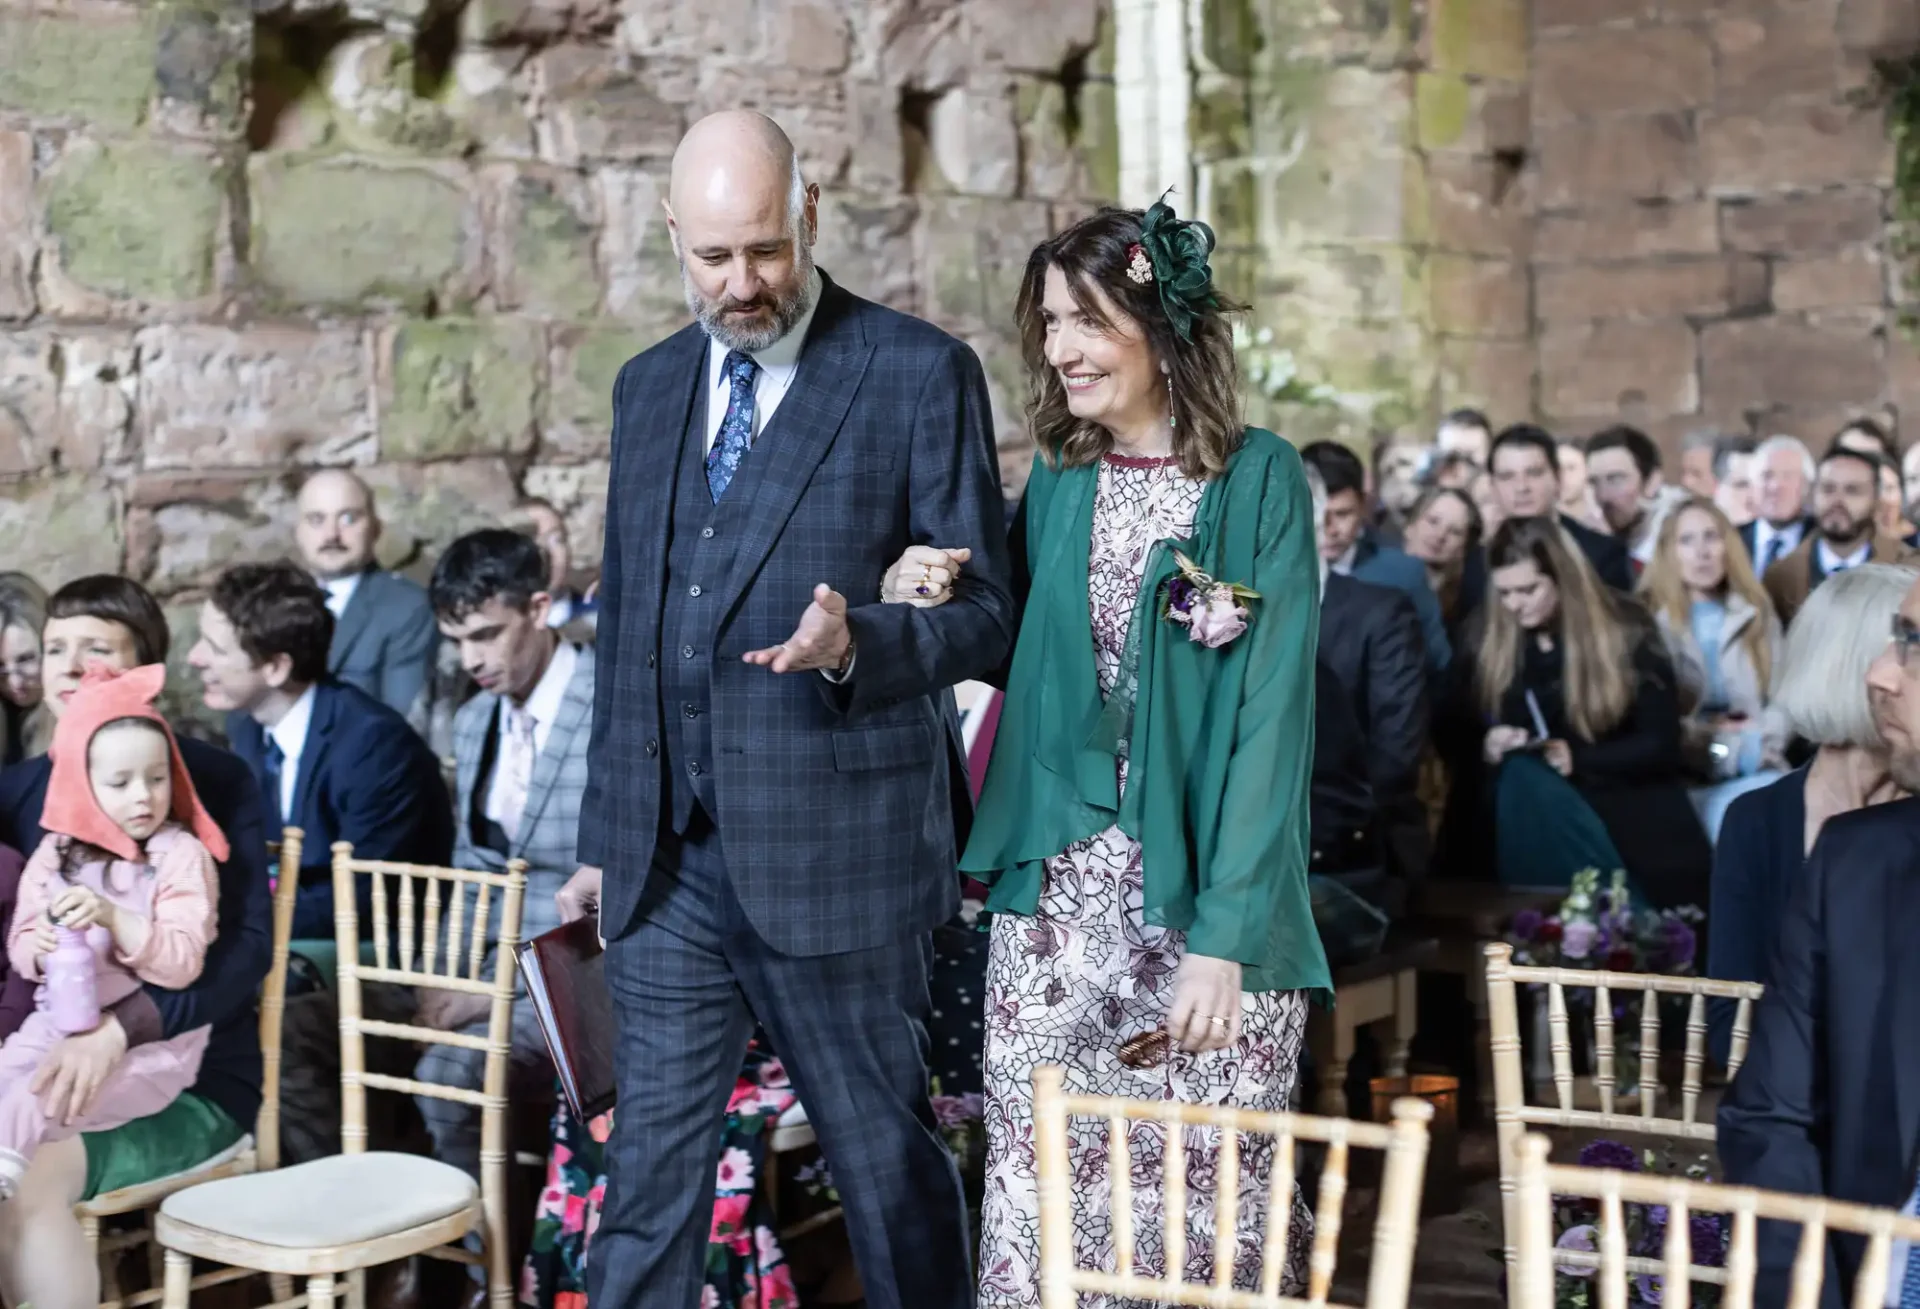 A man in a dark plaid suit and a woman in a green jacket walk down an aisle at an indoor gathering. They are surrounded by seated attendees facing them. The background features a stone wall.